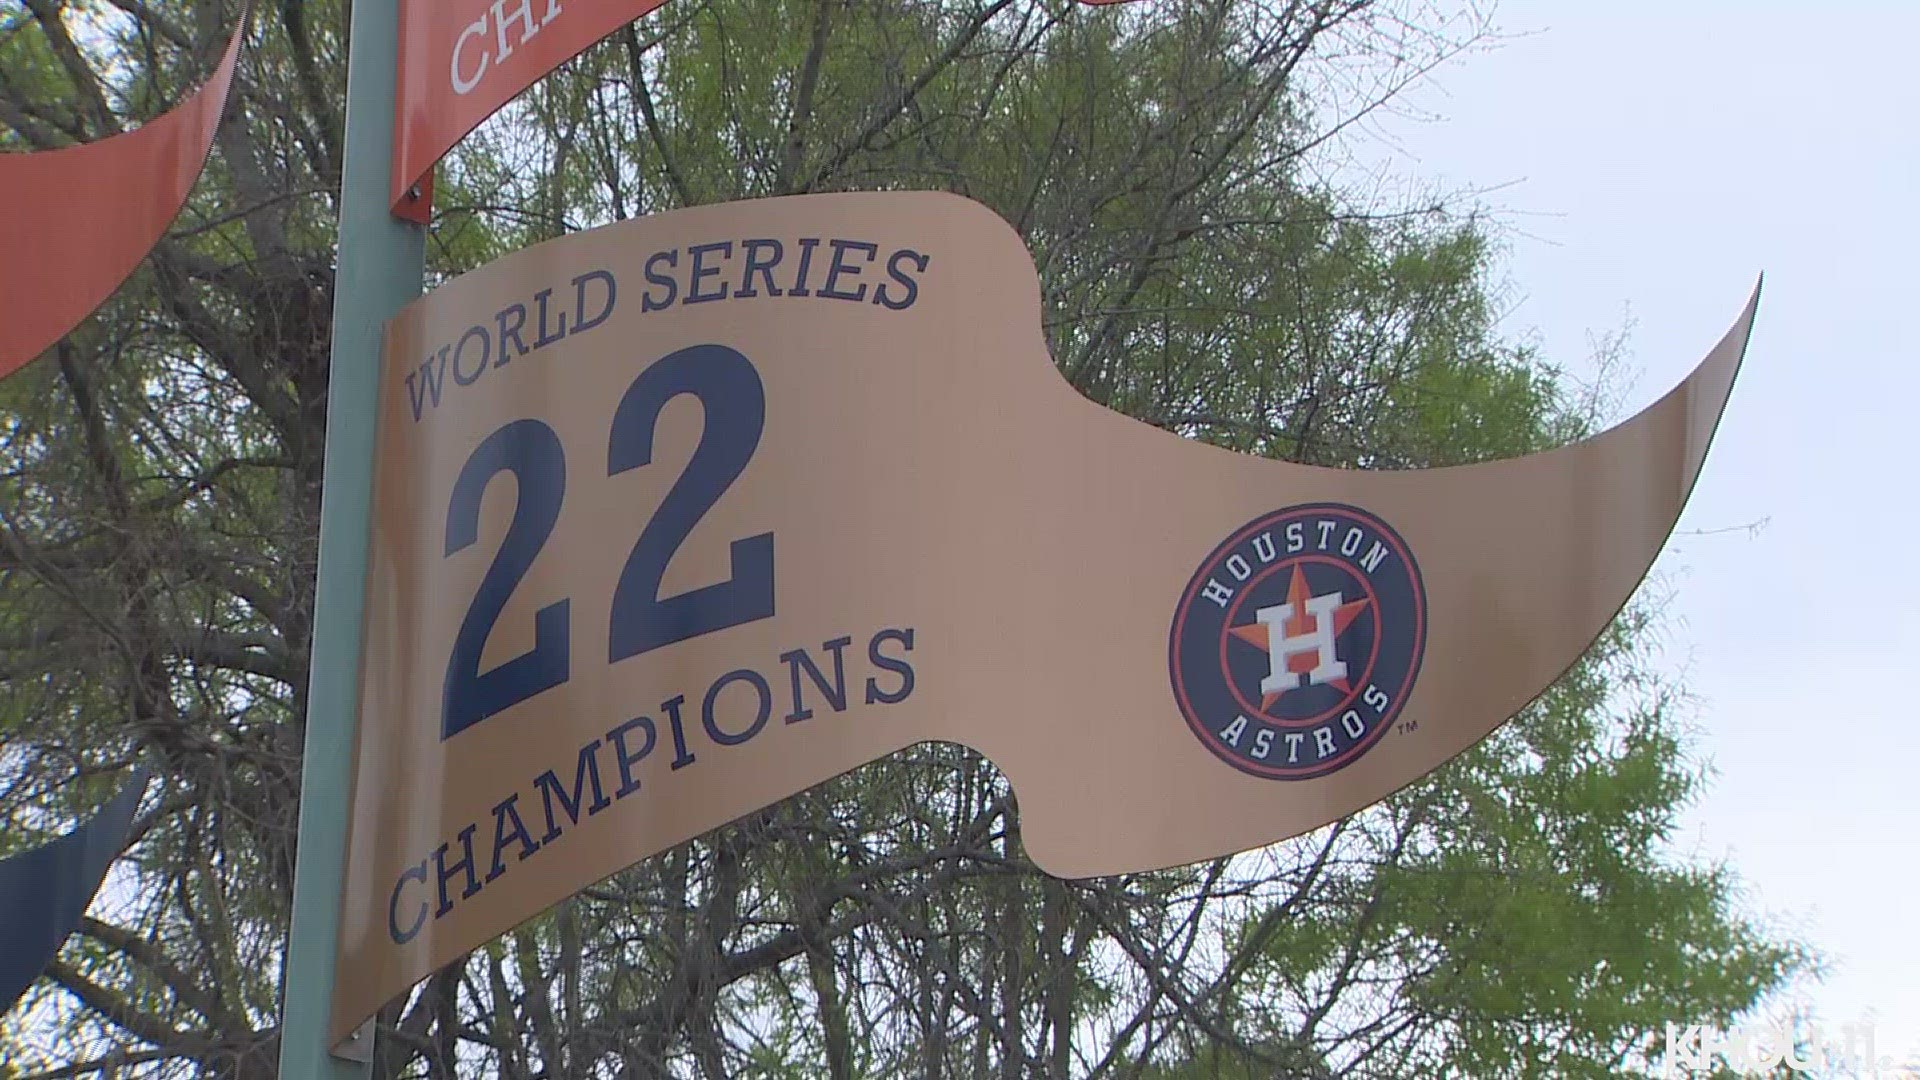 astros 2022 world series champs